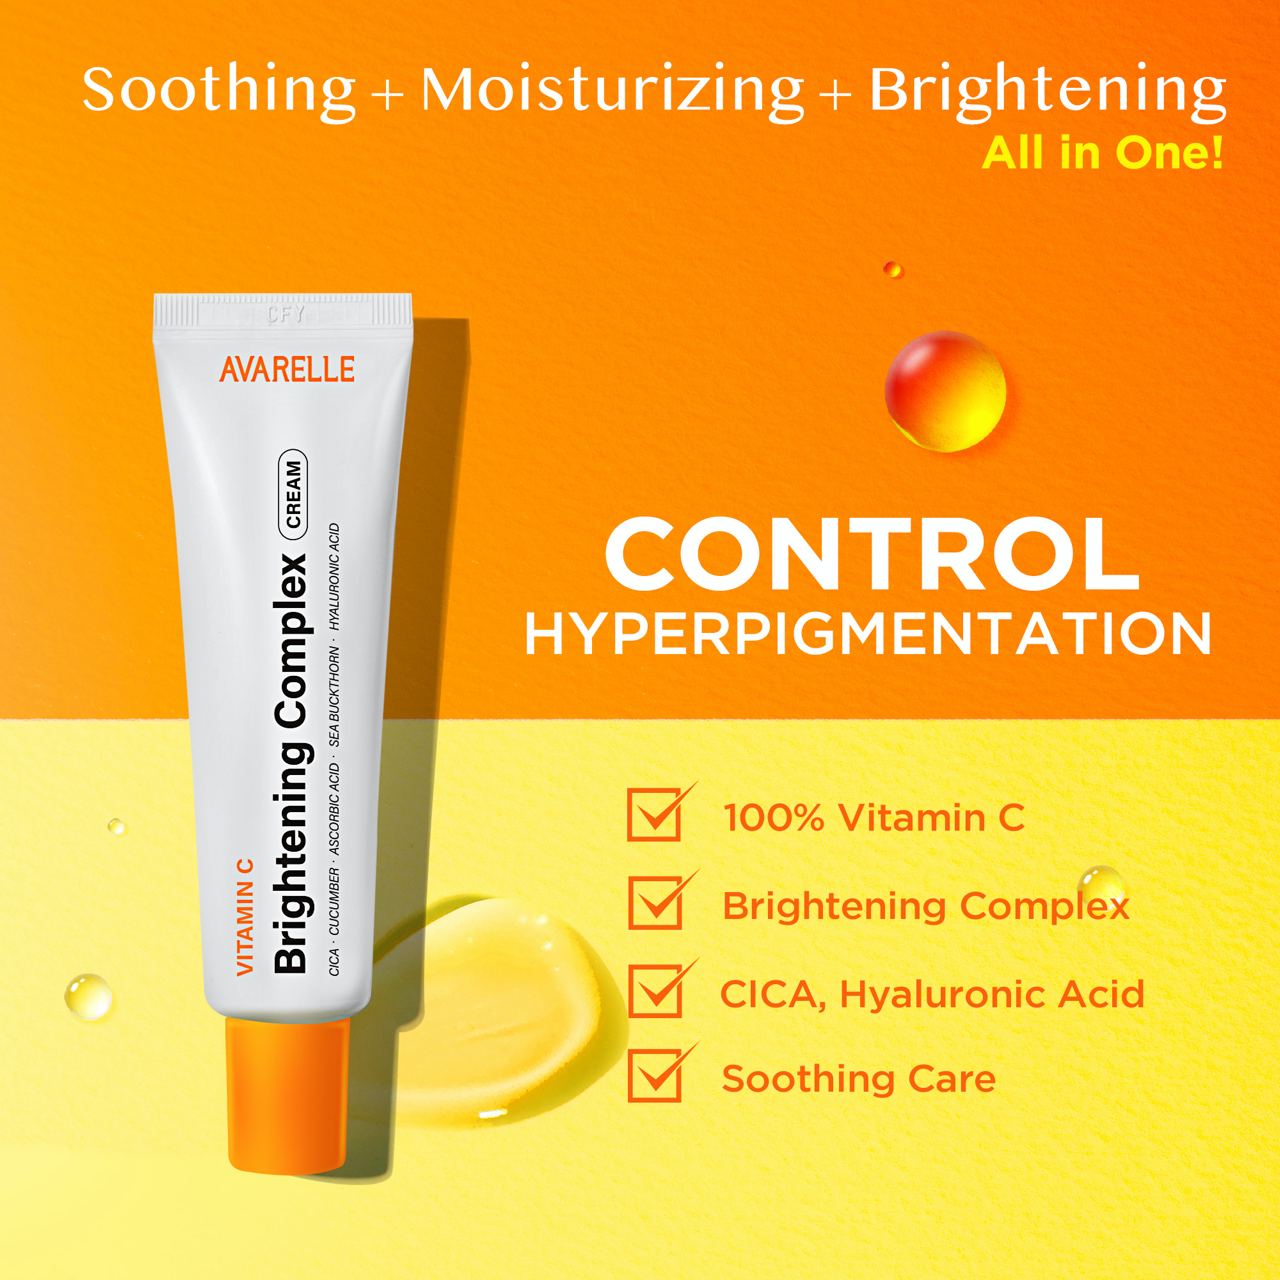 Avarelle's Vitamin C Brightening Complex Cream, featuring Cica and highlighting its soothing, moisturizing, and brightening properties, designed to control hyperpigmentation.